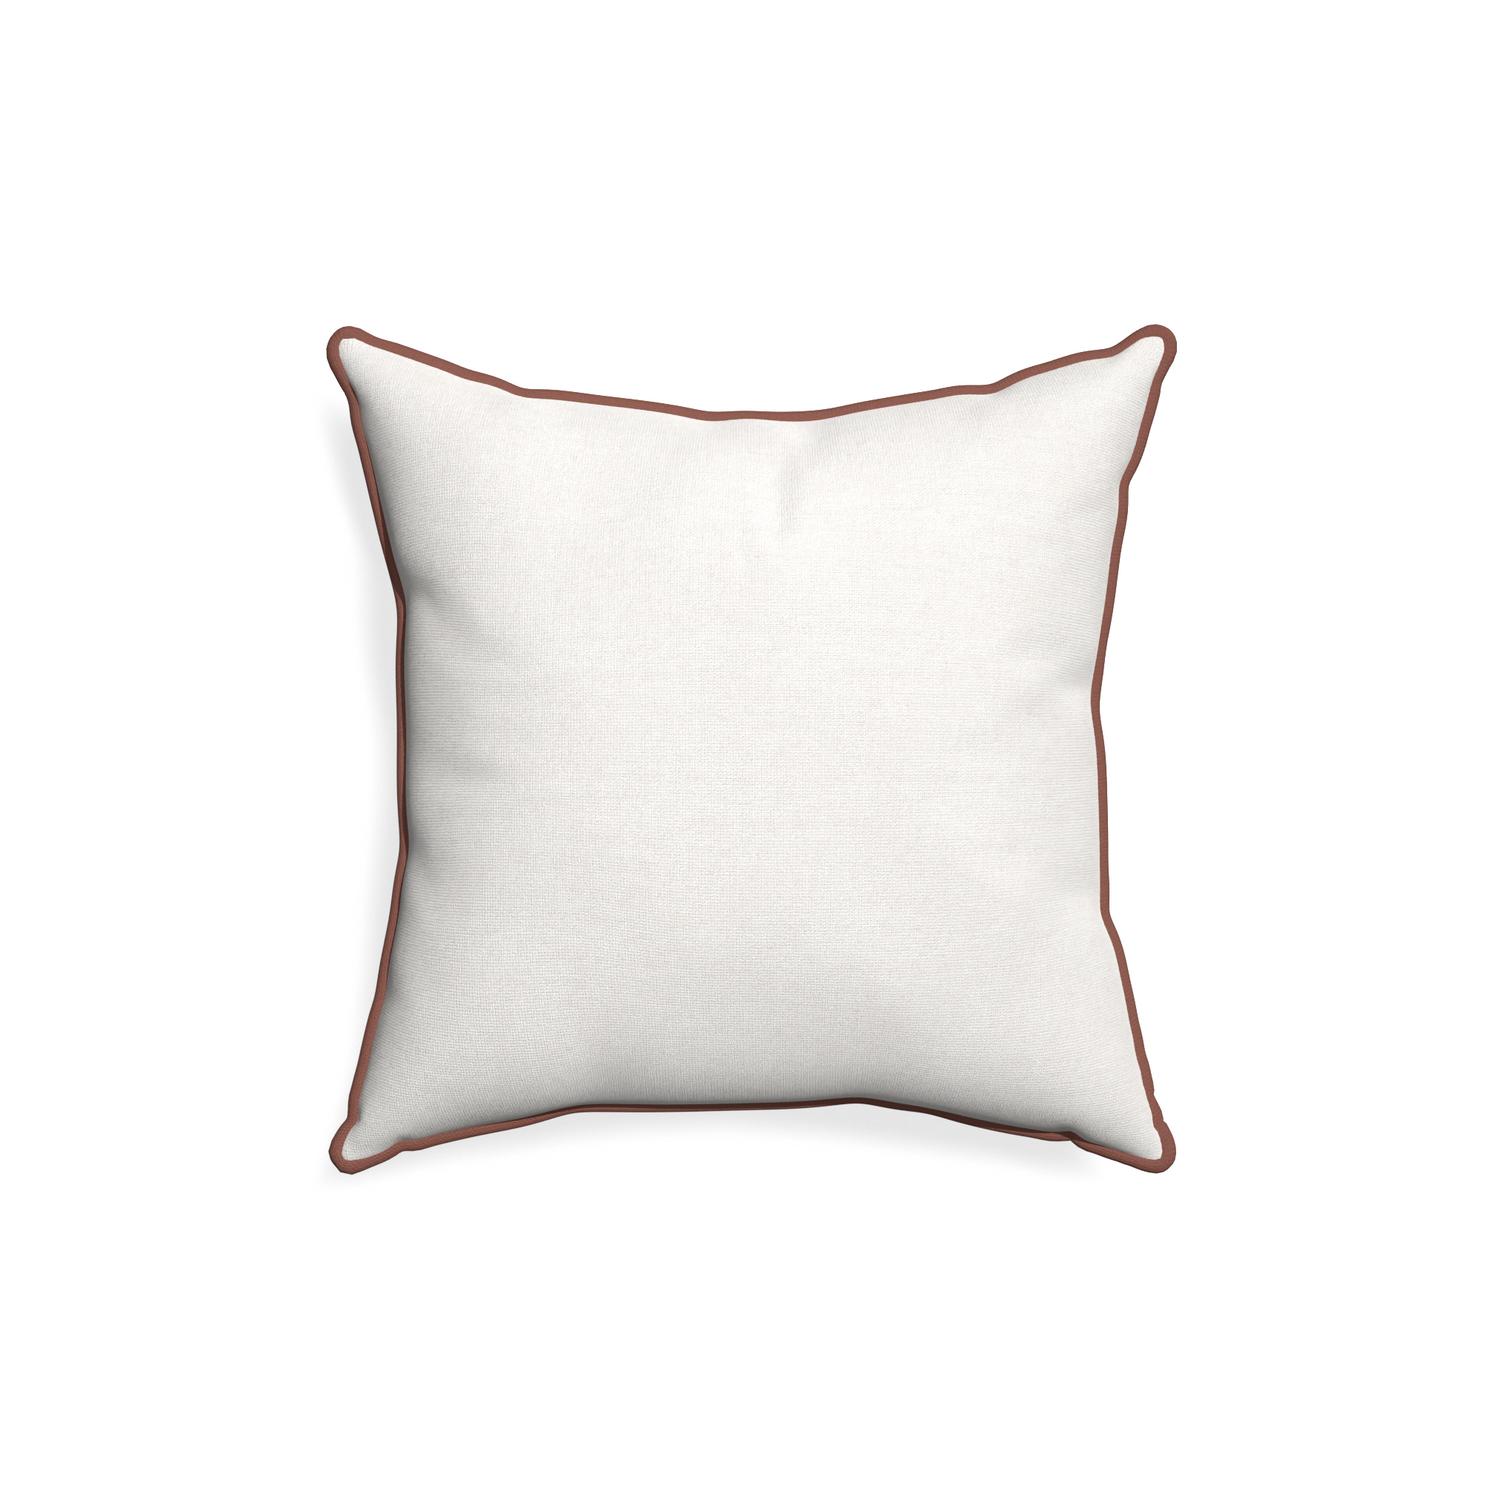 18-square flour custom pillow with w piping on white background